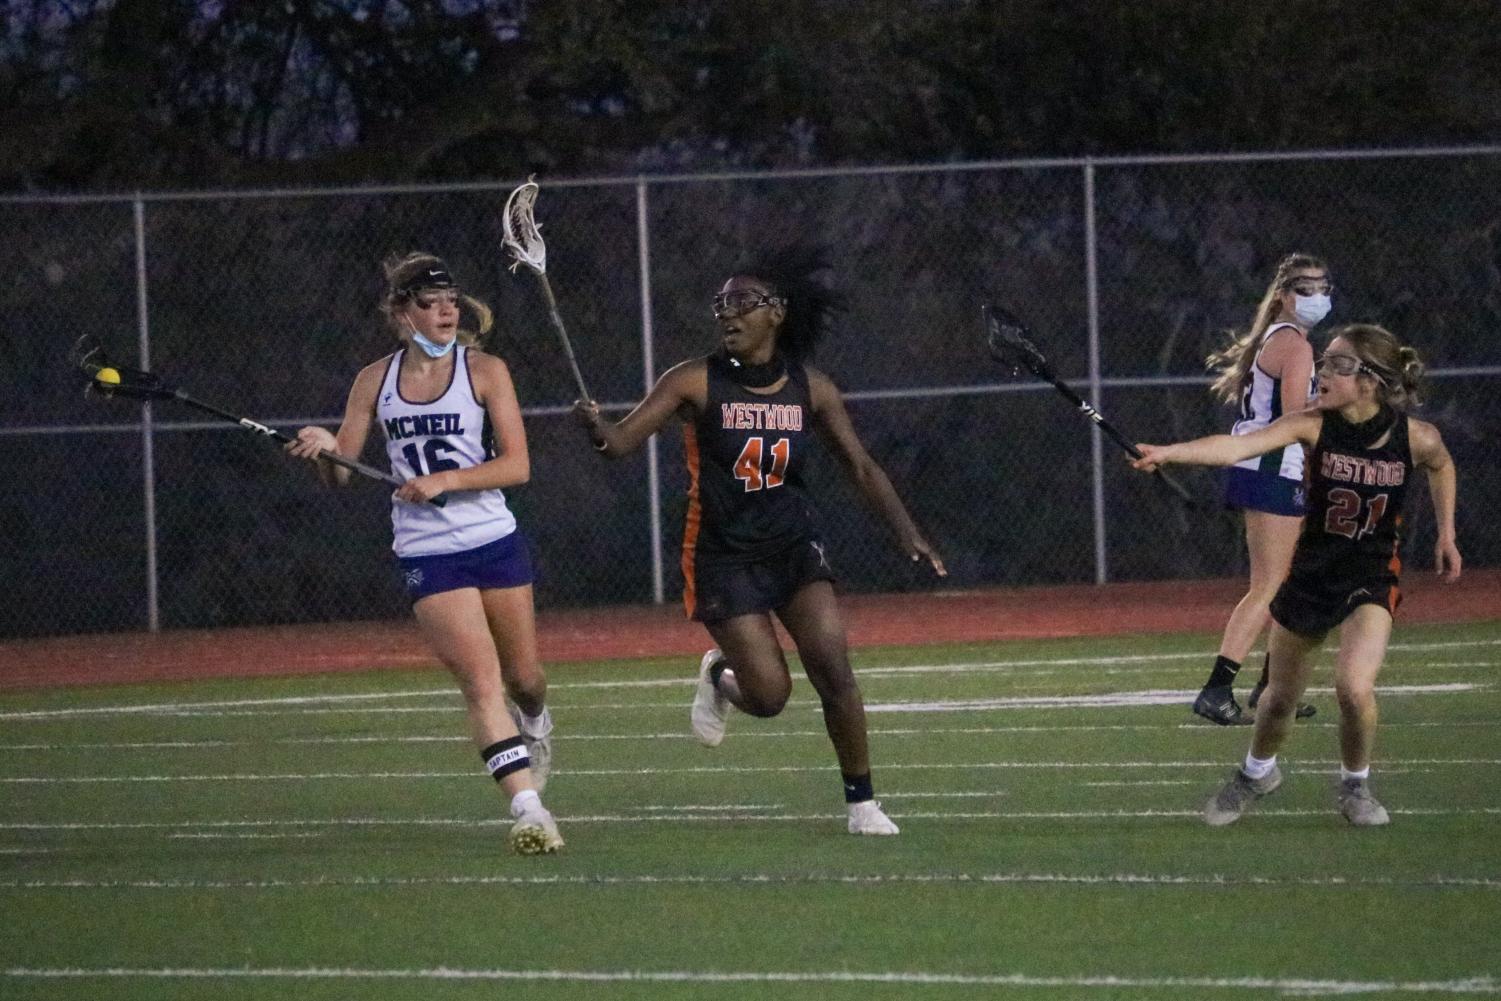 GALLERY%3A+Varsity+Womens+Lacrosse+Falls+to+McNeil+12-8